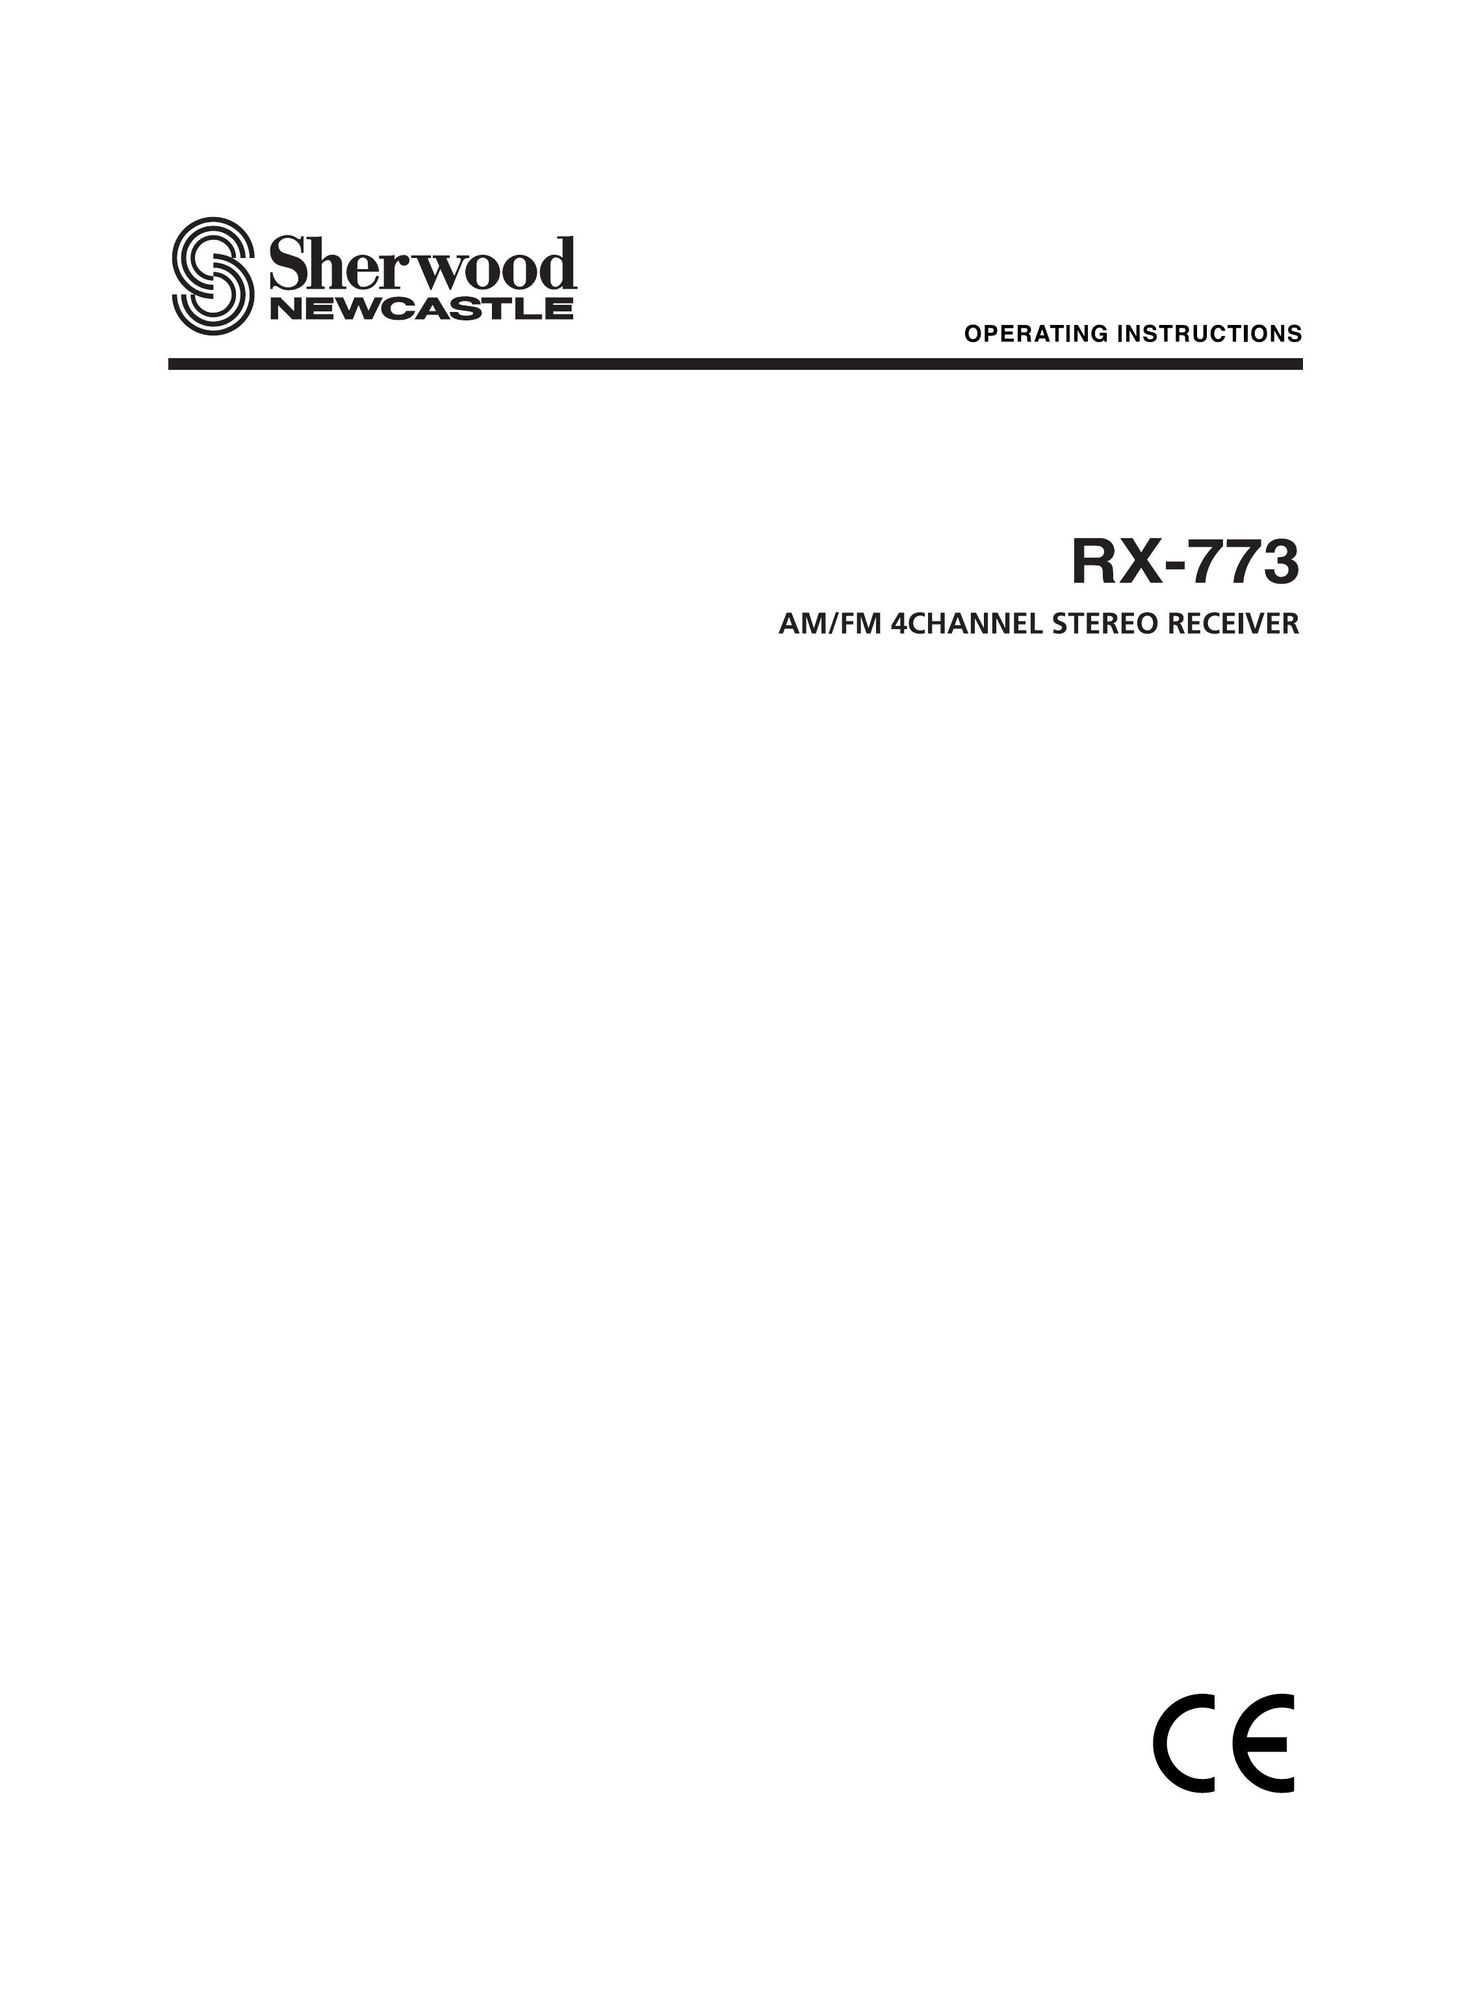 Sherwood RX-773 Stereo Receiver User Manual